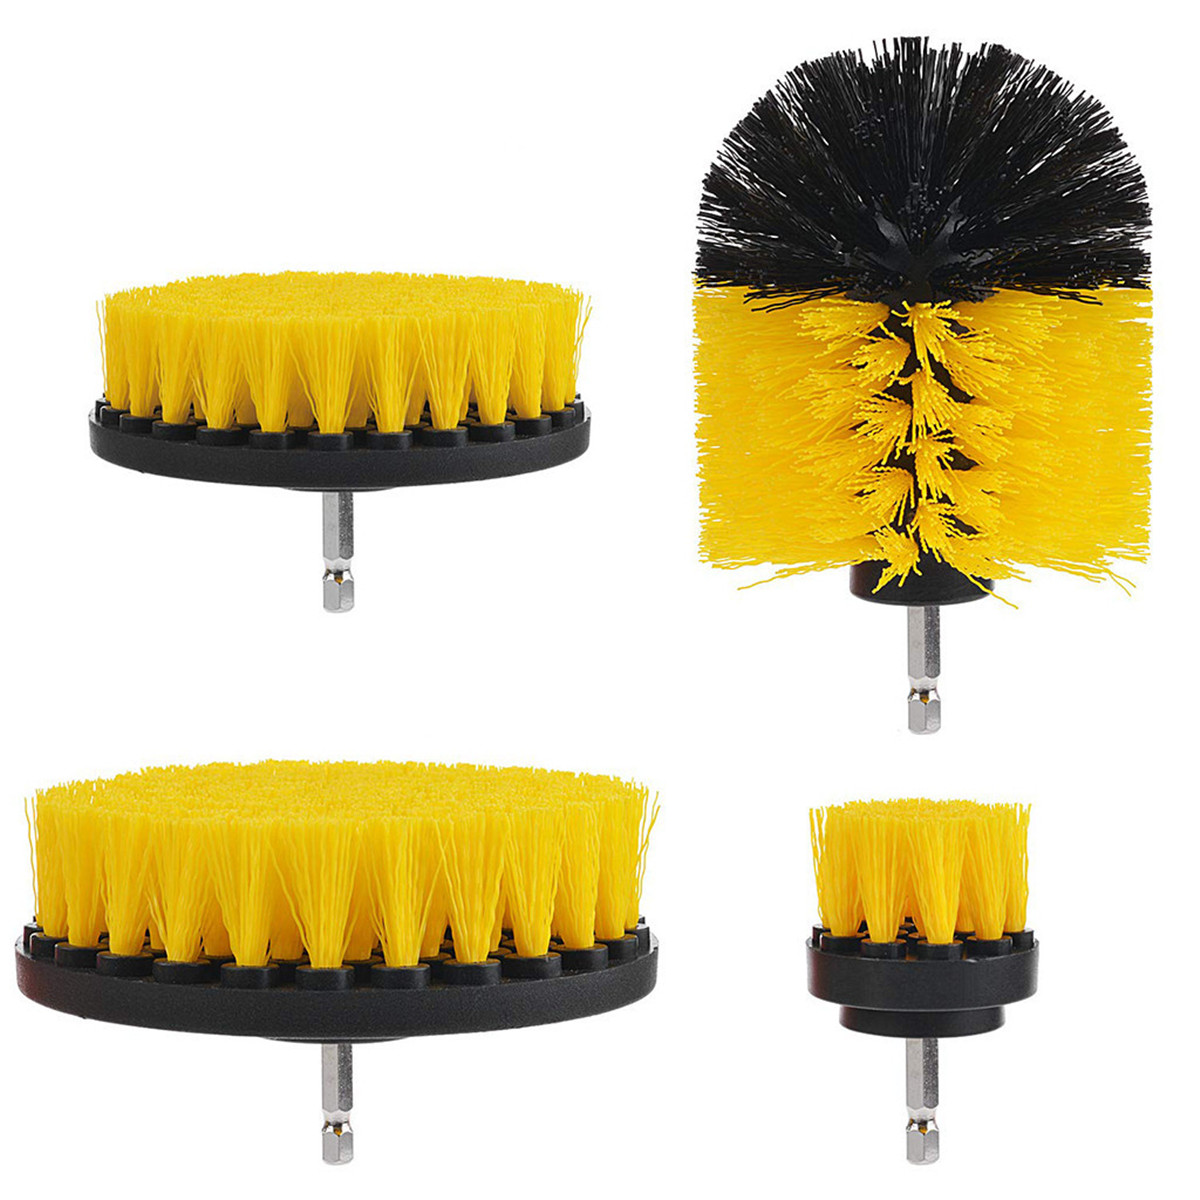 12Pcs-Drill-Brush-Set-Tub-Cleaner-Grout-Power-Scrubber-Cleaning-Attachments-Kit-1780037-9